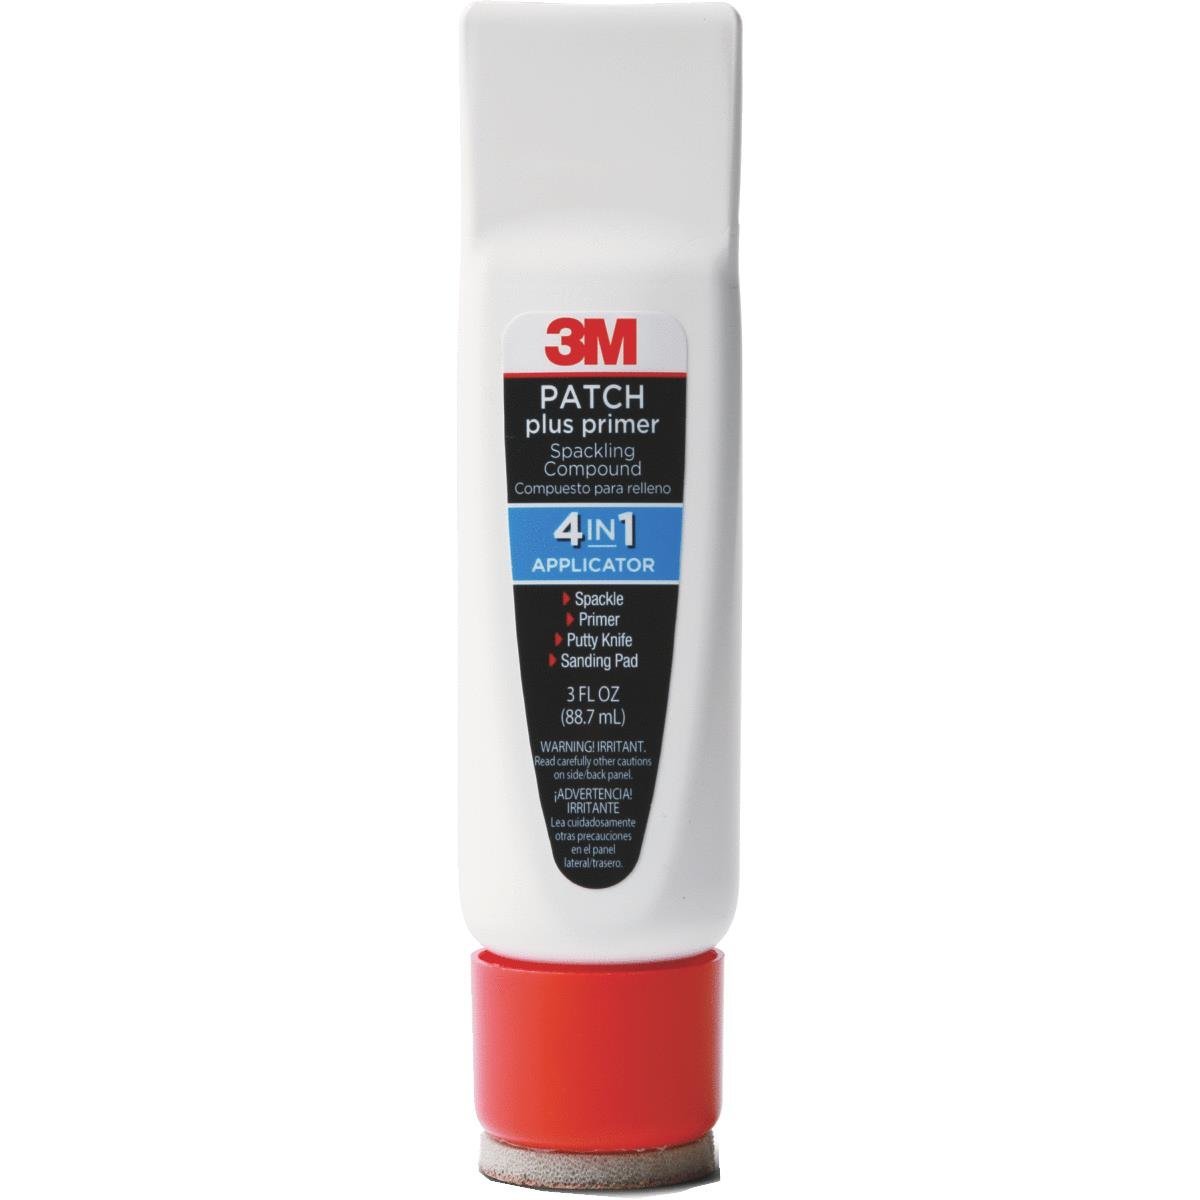 3M Patch + Primer 4-in-1